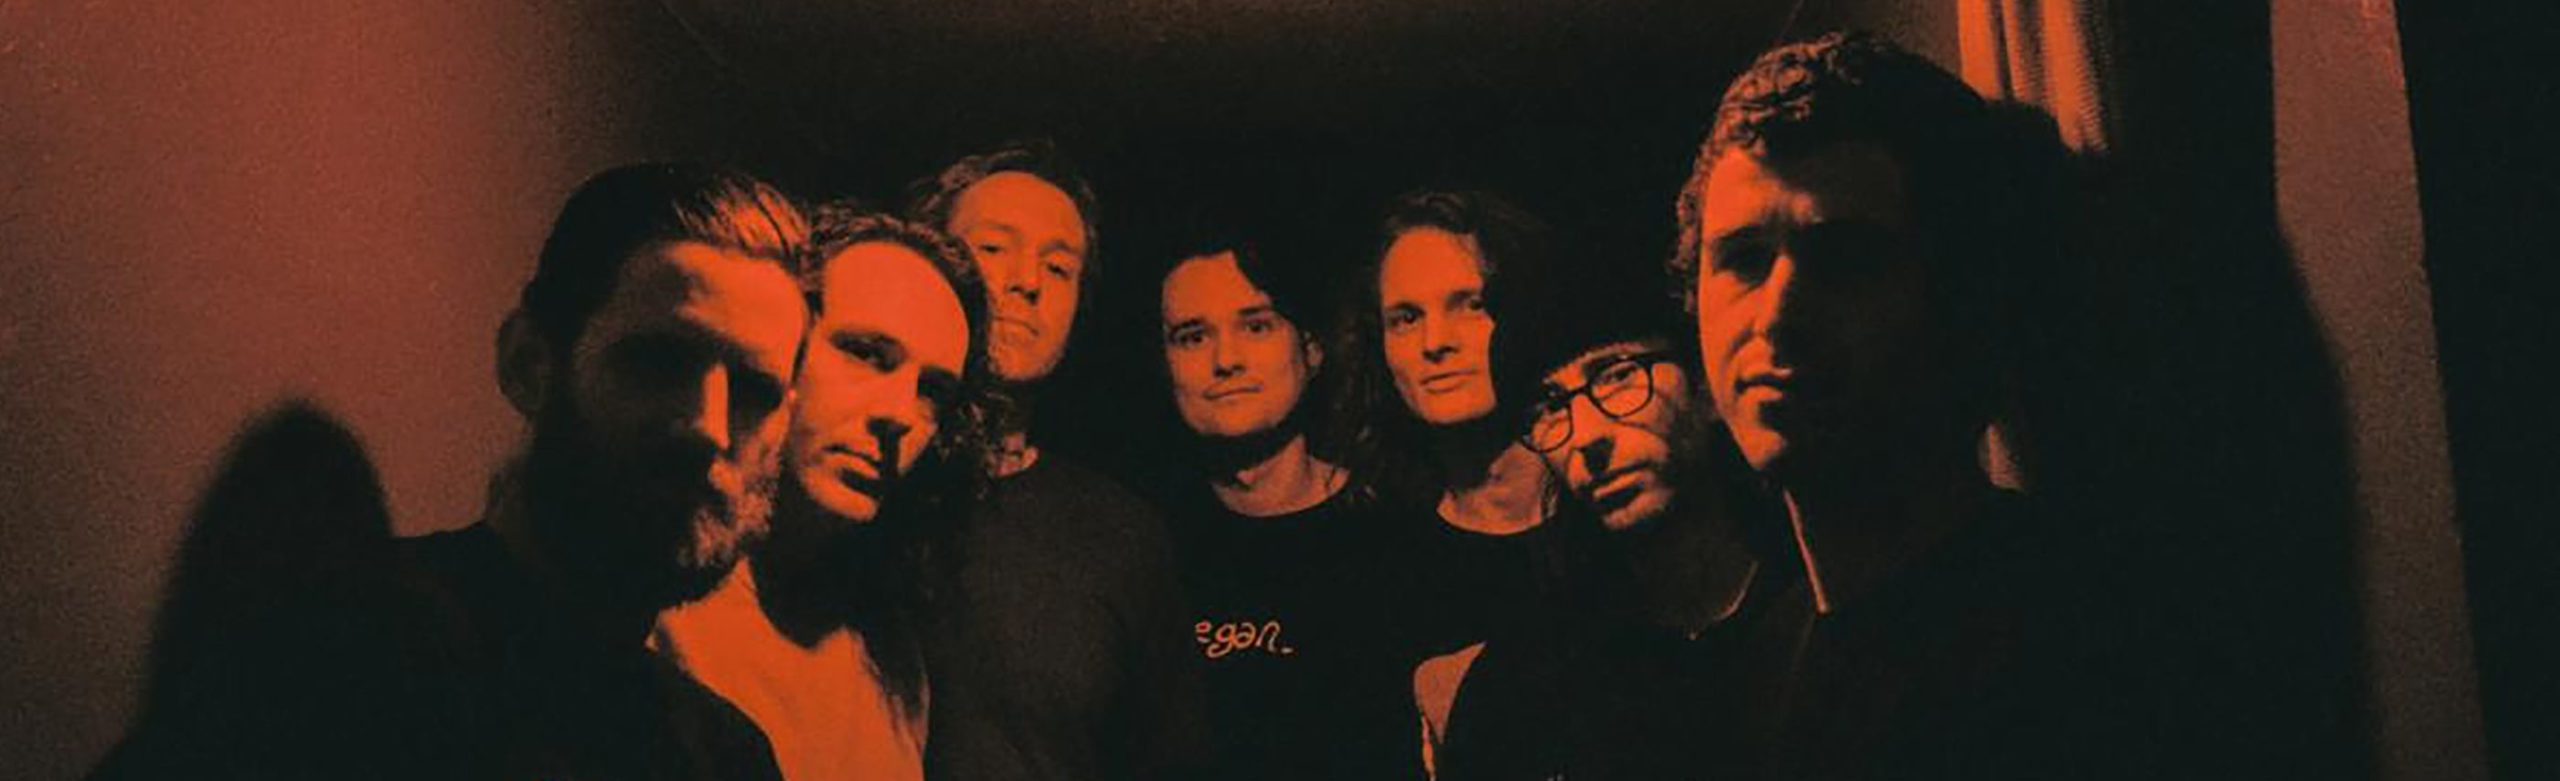 CANCELLED: King Gizzard and The Lizard Wizard